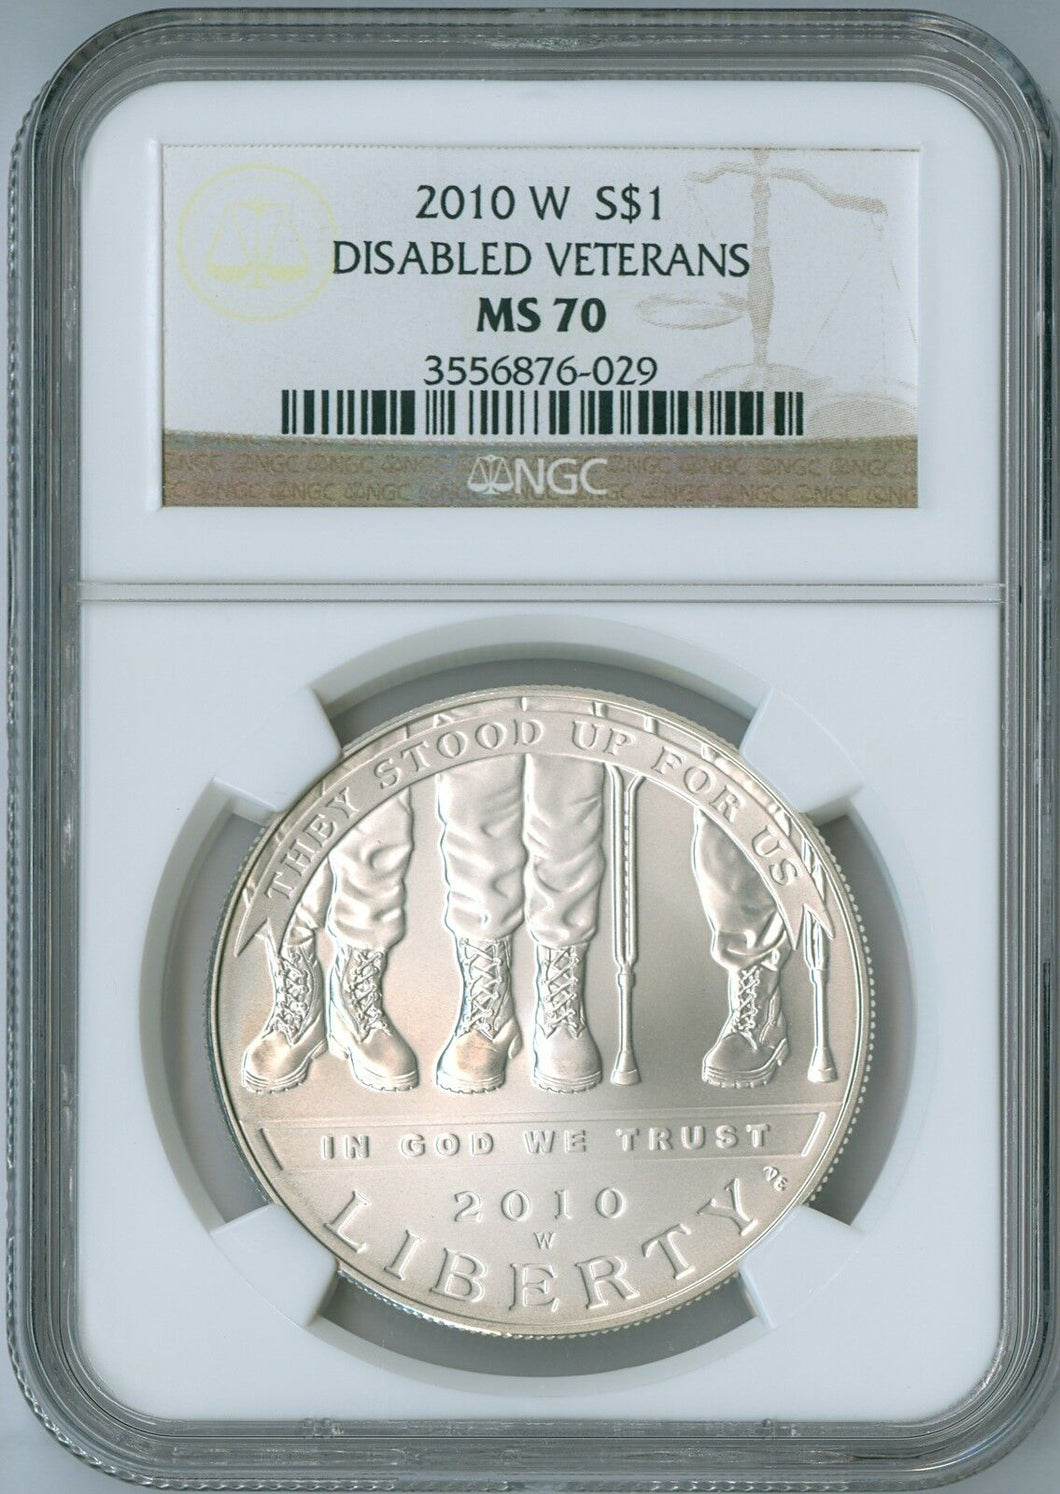 2010 Disabled American Veterans Commemorative Coin $1 NGC MS 70 MS70